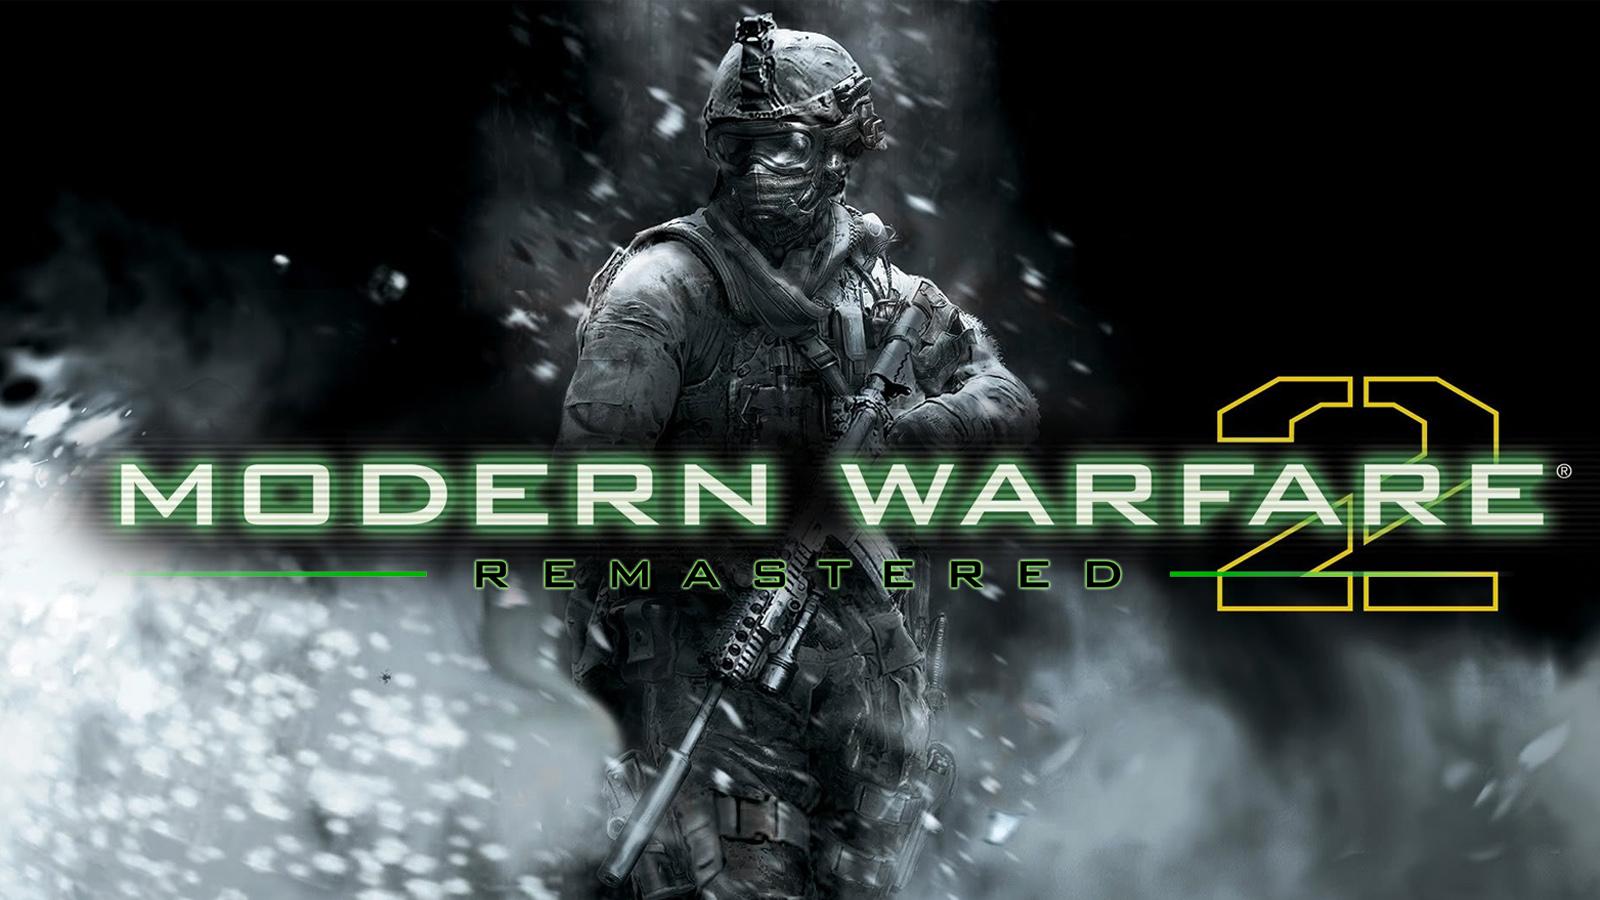 When is Call of Duty: MW2 Remastered coming out? Rumors, release